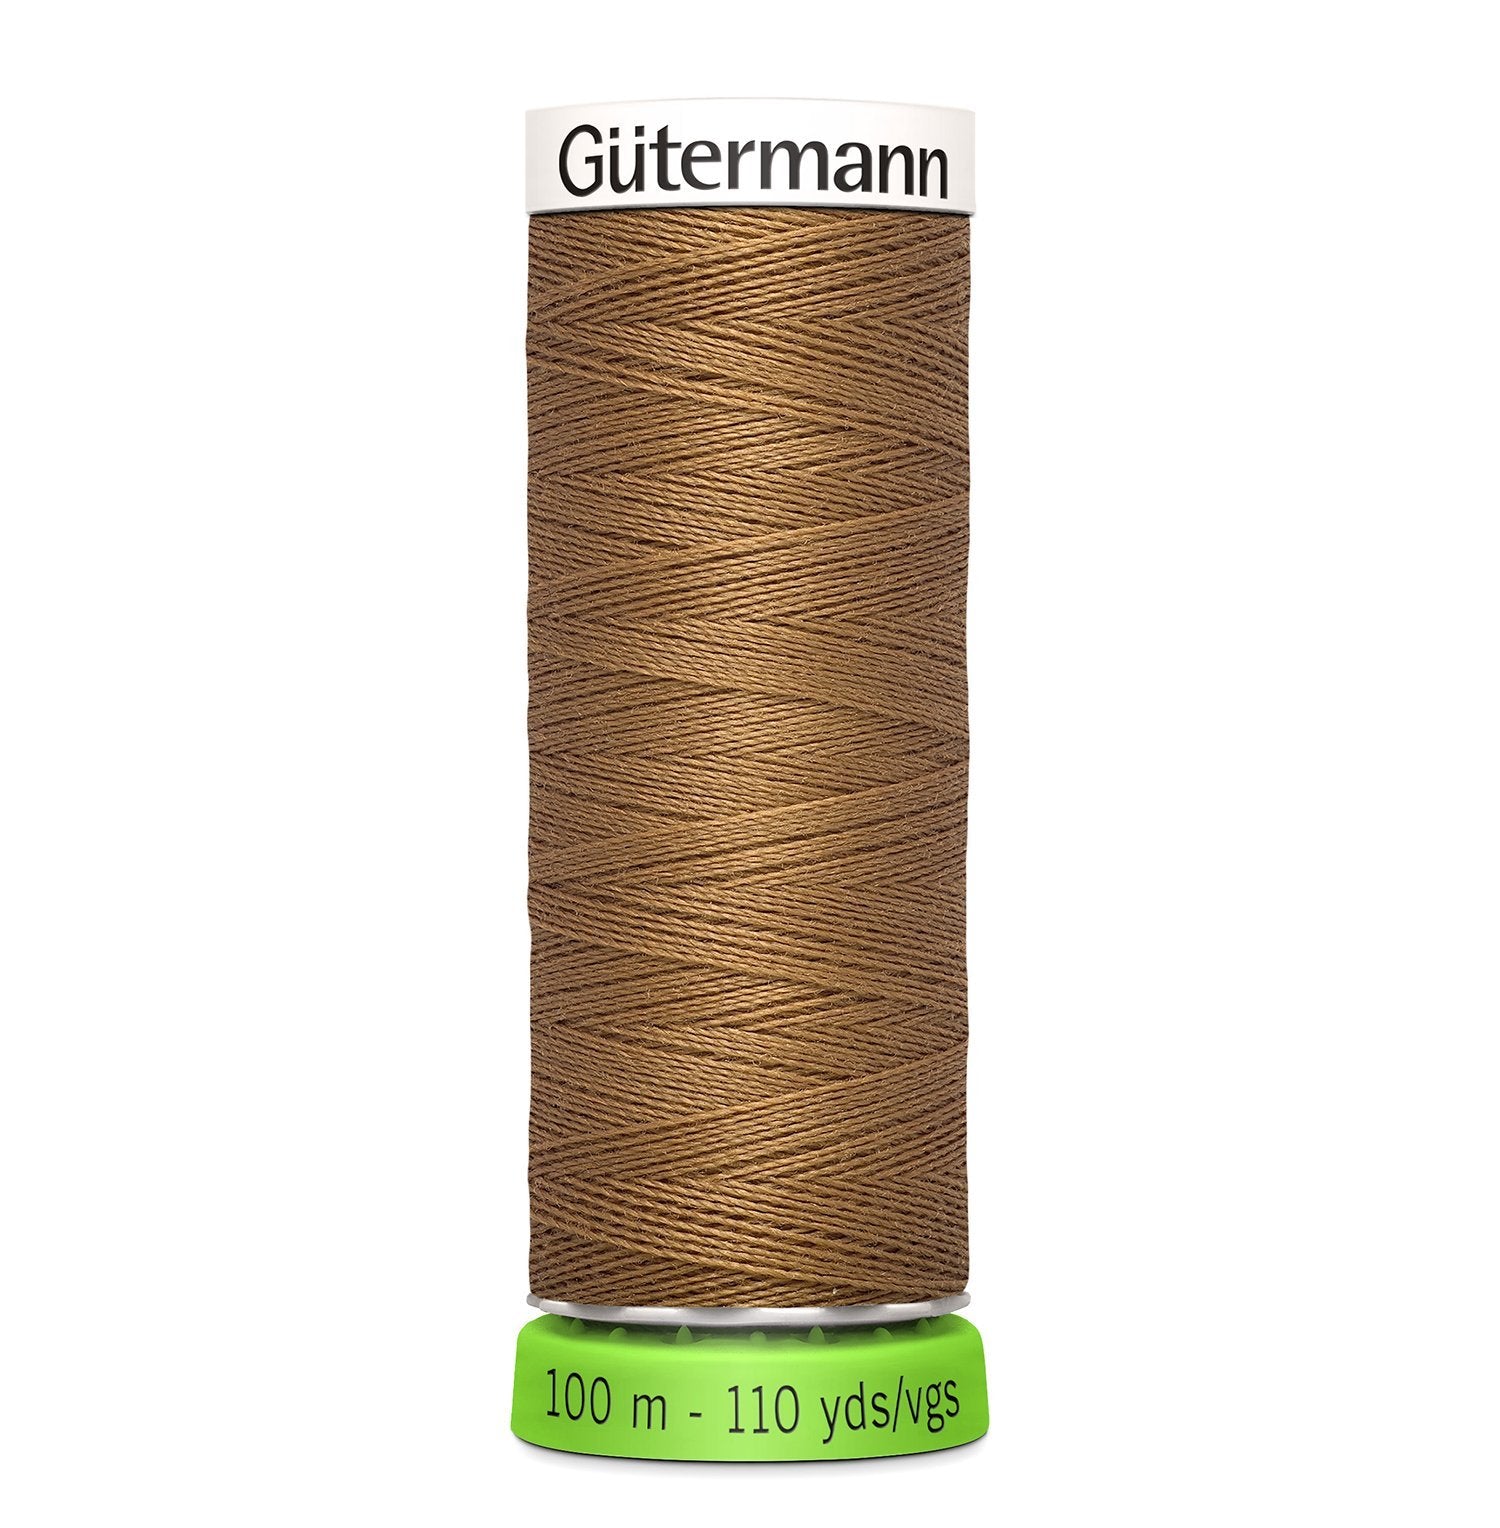 Gutermann Recycled Thread 100m, Colour 887 from Jaycotts Sewing Supplies